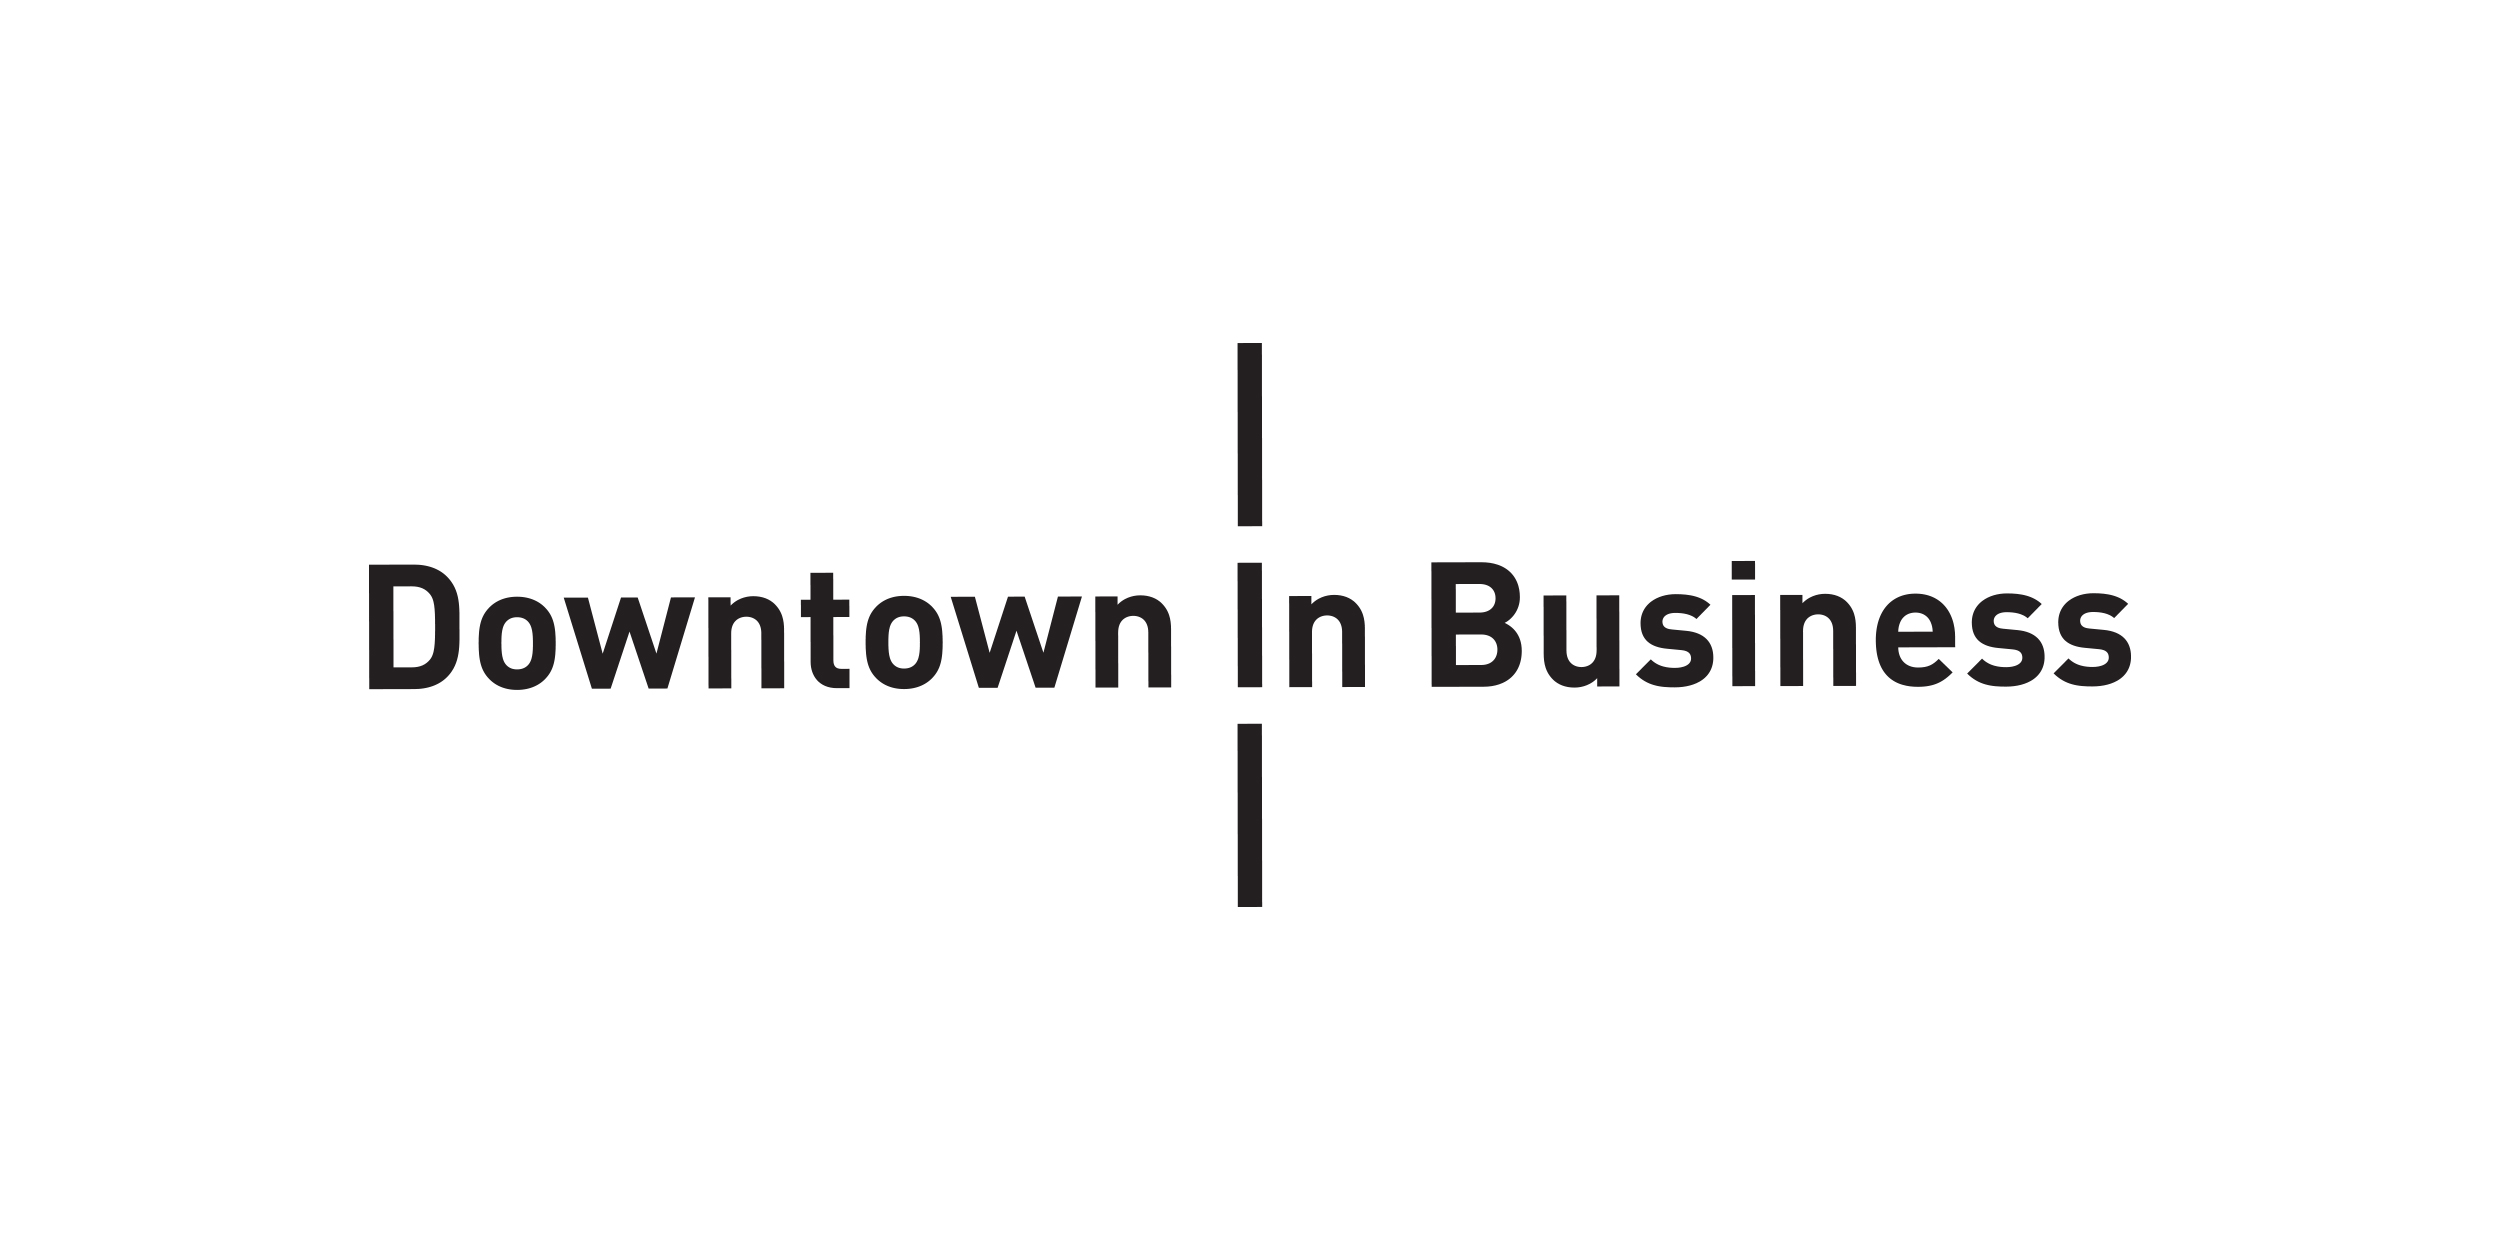 Downtown in Business